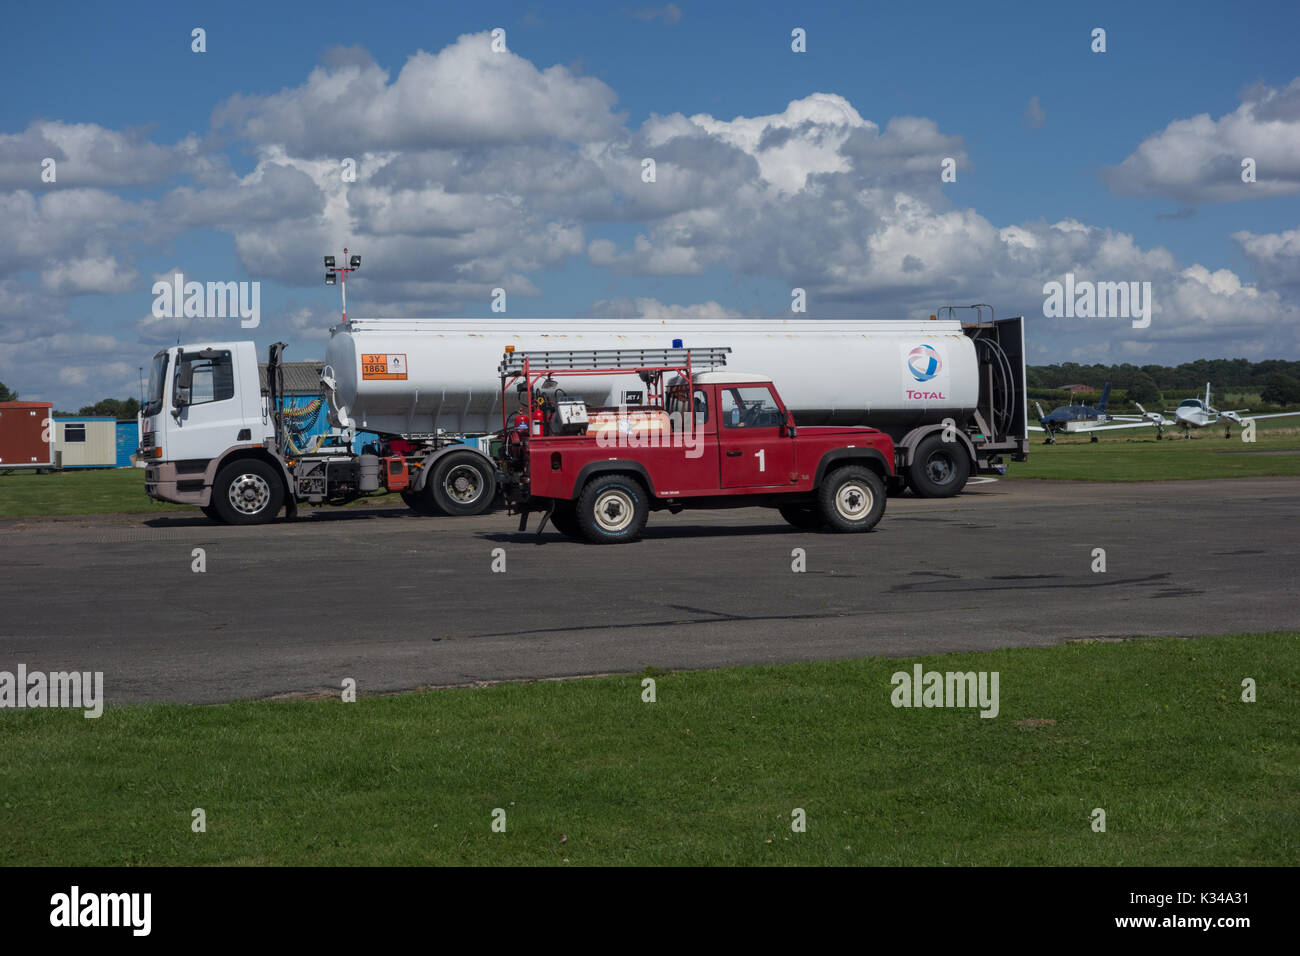 Fire truck and fuel tanker. Wolverhampton Halfpenny Green Airport. South Staffordshire. UK Stock Photo